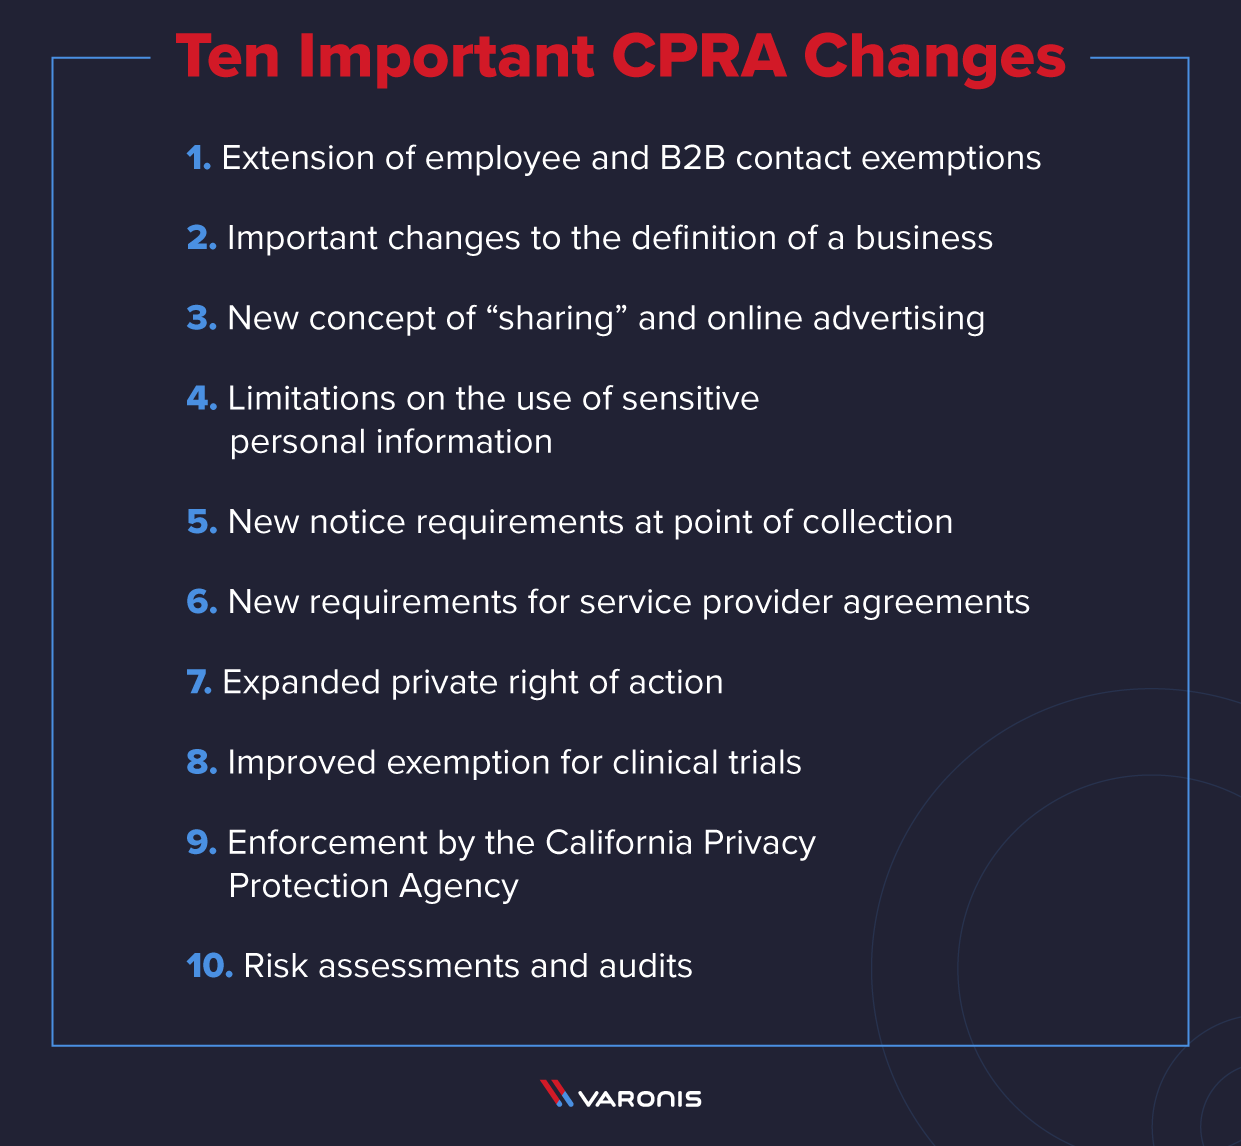 ten important CPRA changes visual